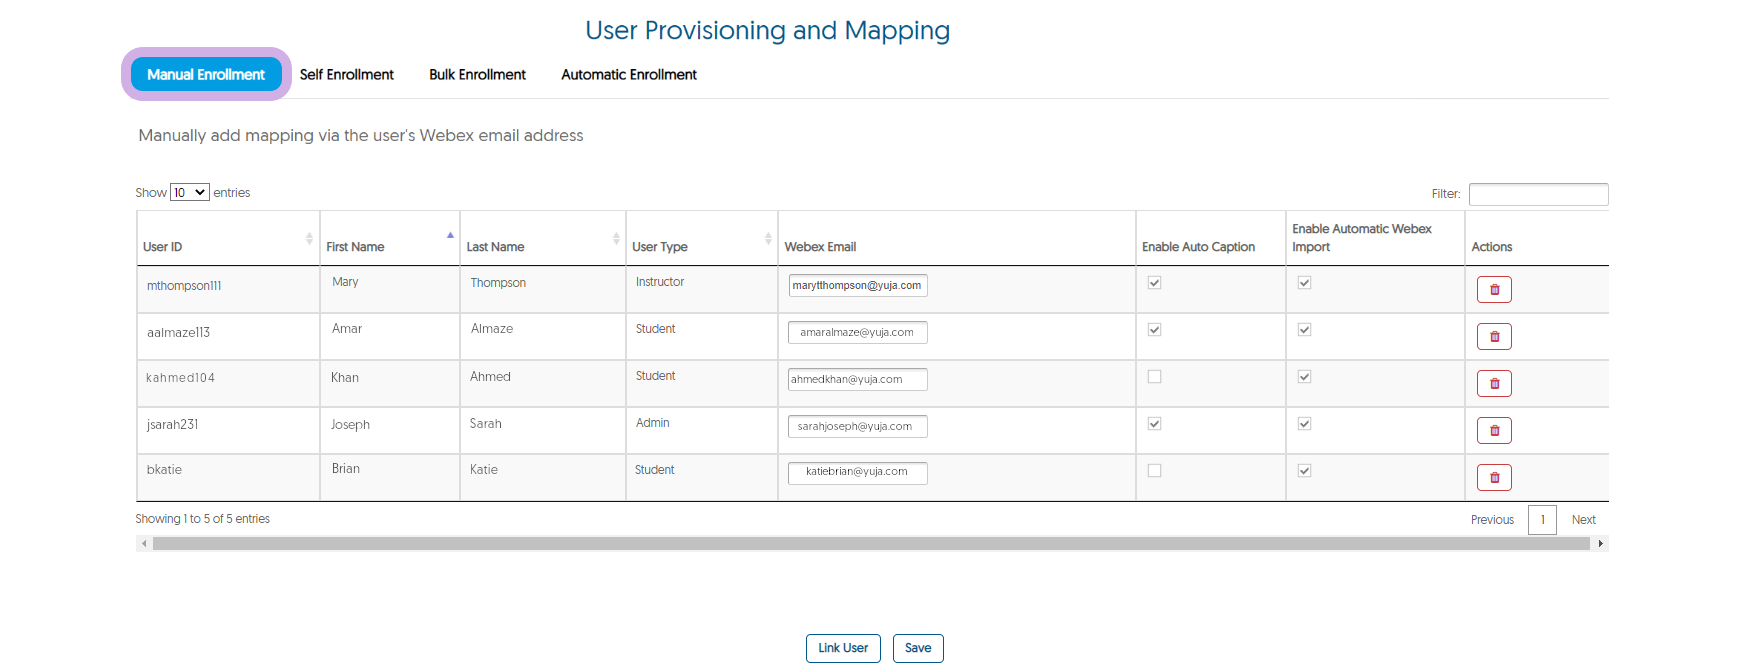 The User Provisioning and Mapping panel for Webex with Manual Enrollment selected.